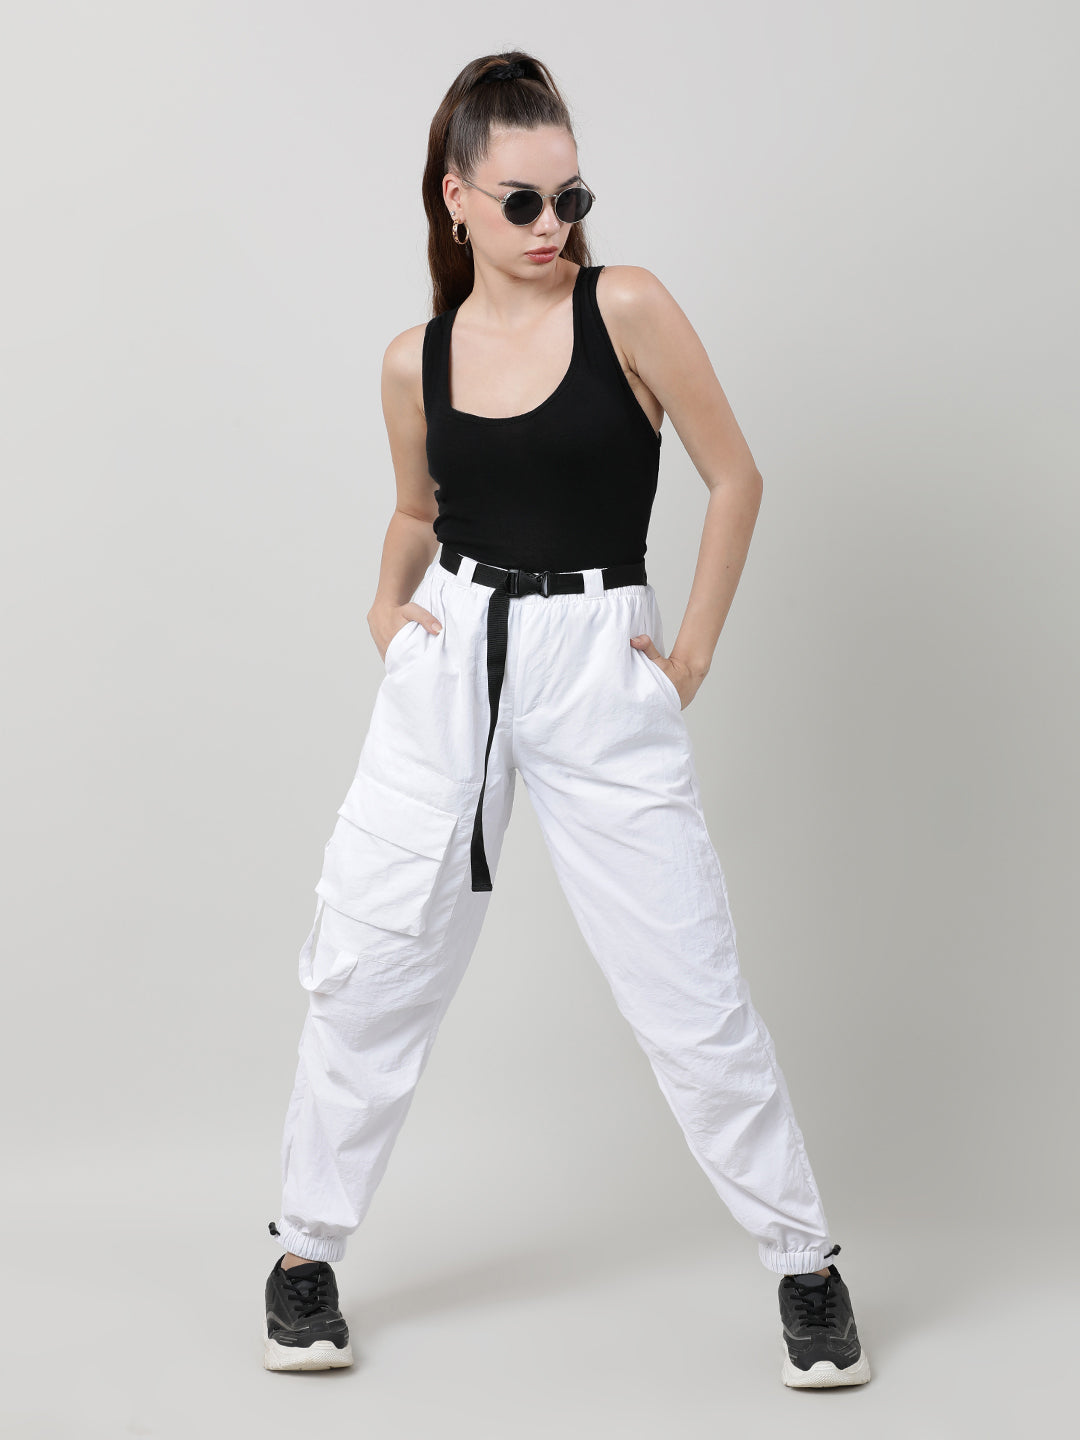 2023 Cargo Pants: Stylish Solid Color Capris For Women Stylish,  Comfortable, And Decorative Cuff Suspenders From Louis_ve_store, $4.12